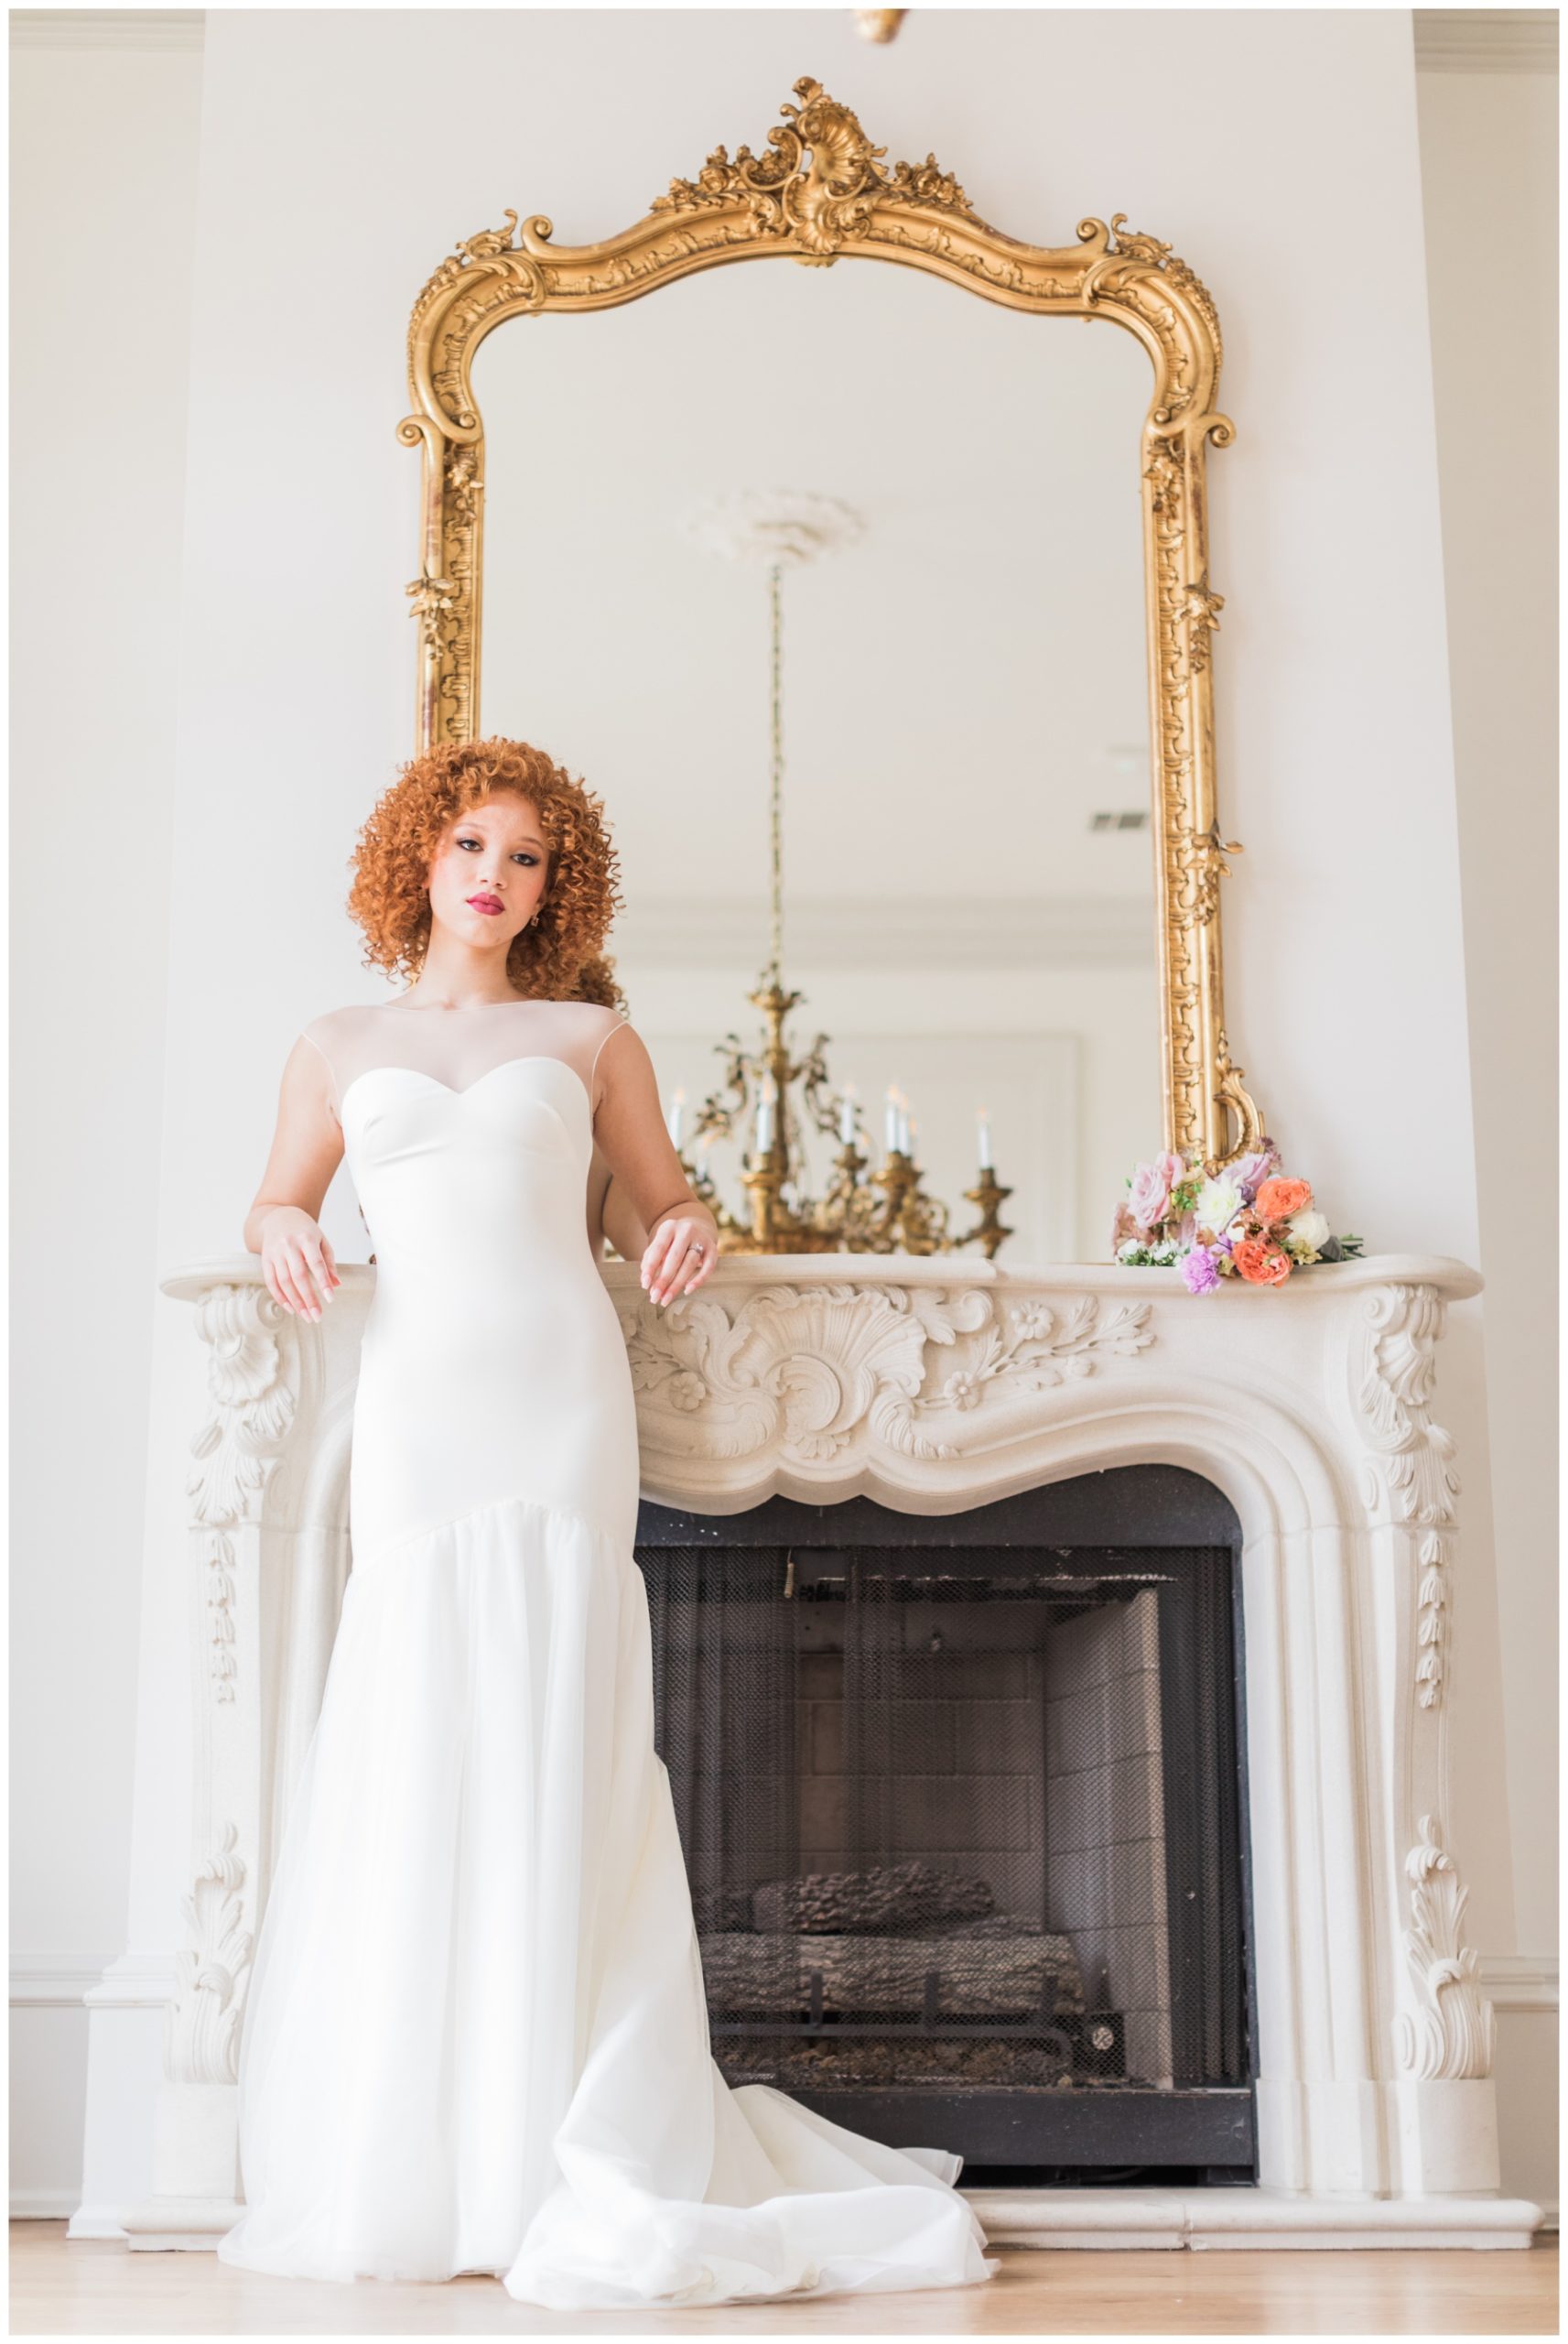 Bride in Holmes by Theia from BHLDN